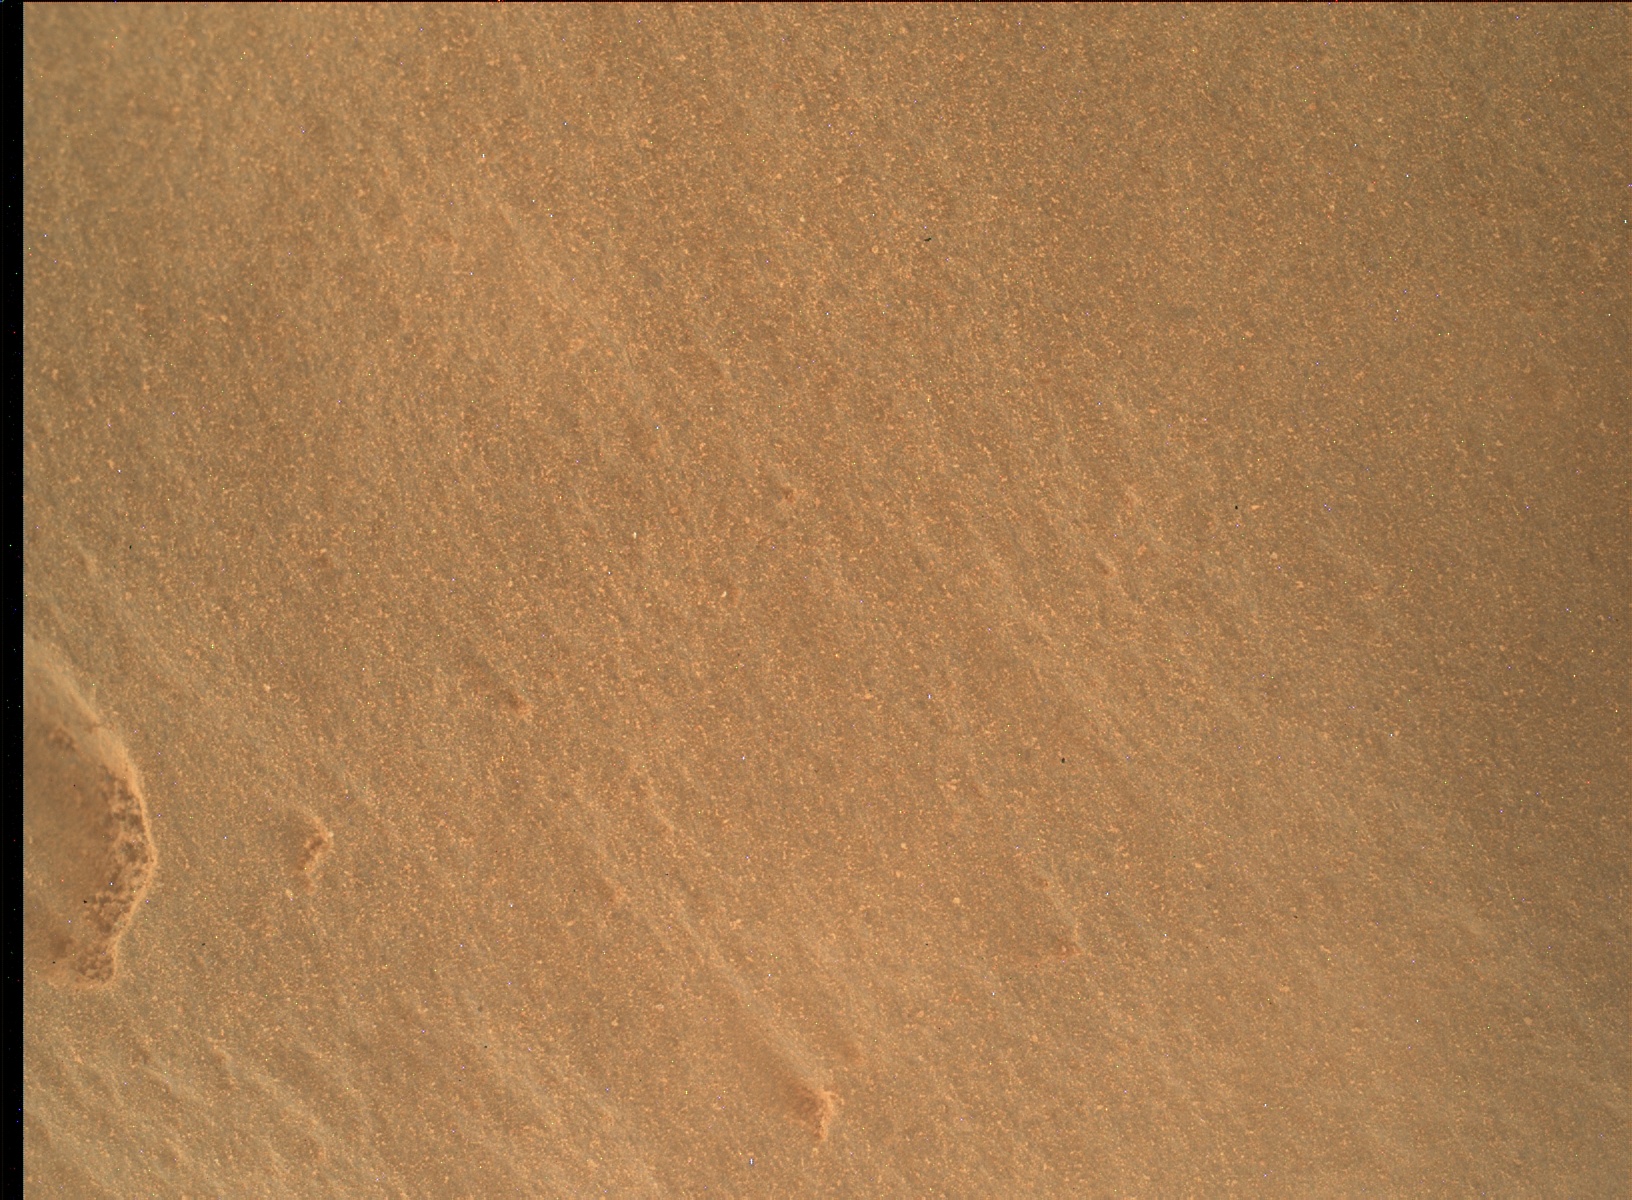 Nasa's Mars rover Curiosity acquired this image using its Mars Hand Lens Imager (MAHLI) on Sol 3930